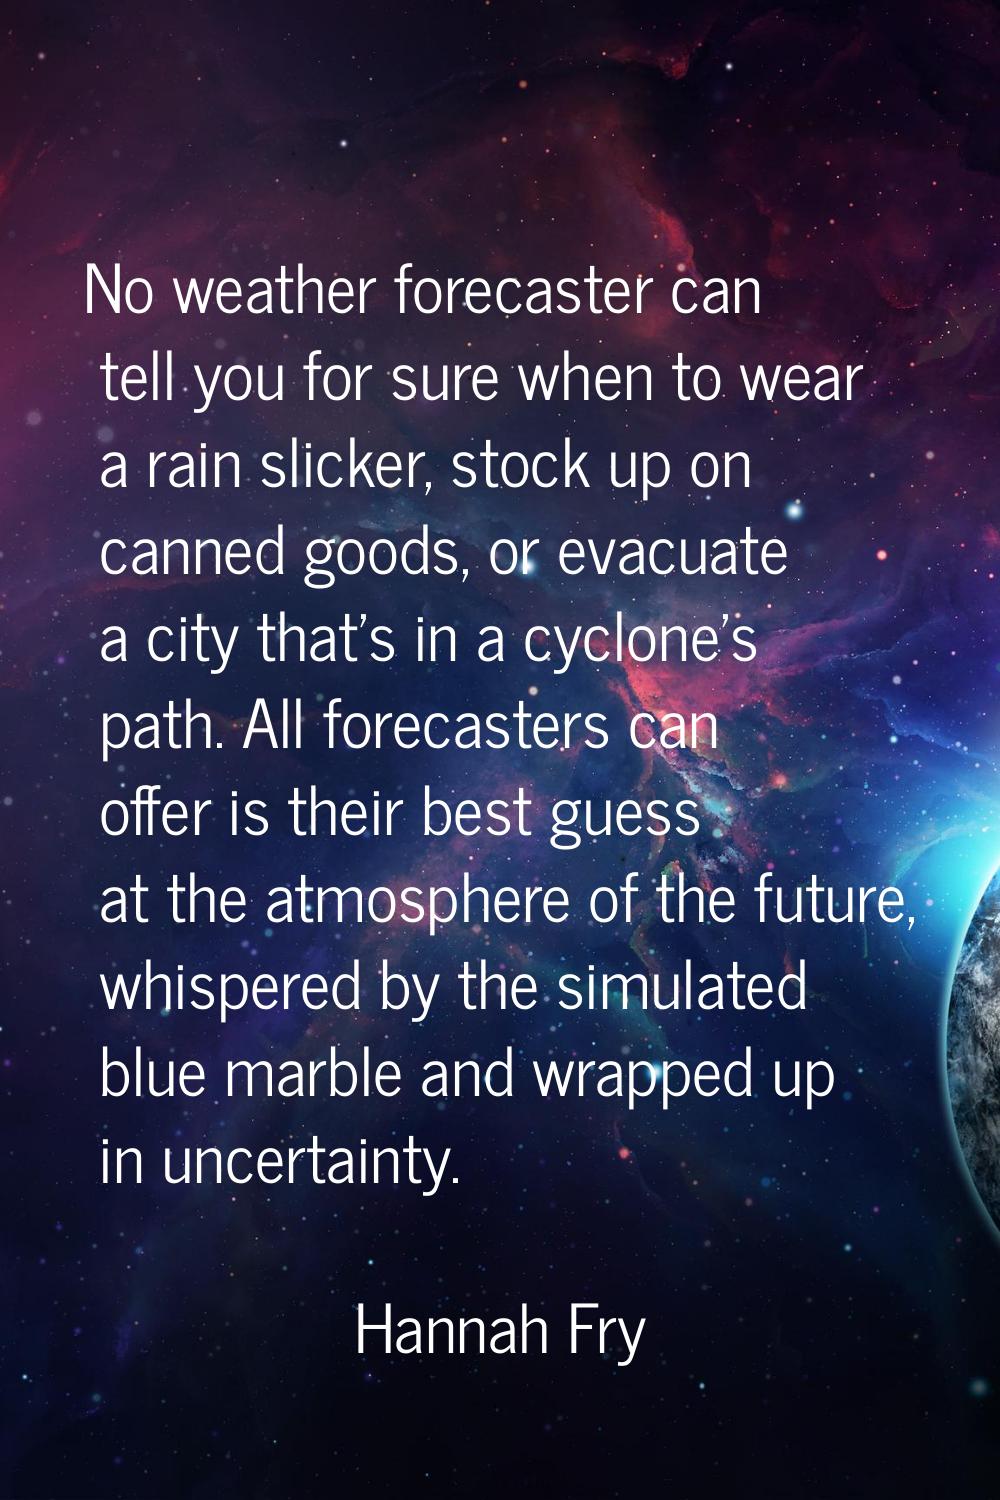 No weather forecaster can tell you for sure when to wear a rain slicker, stock up on canned goods, 